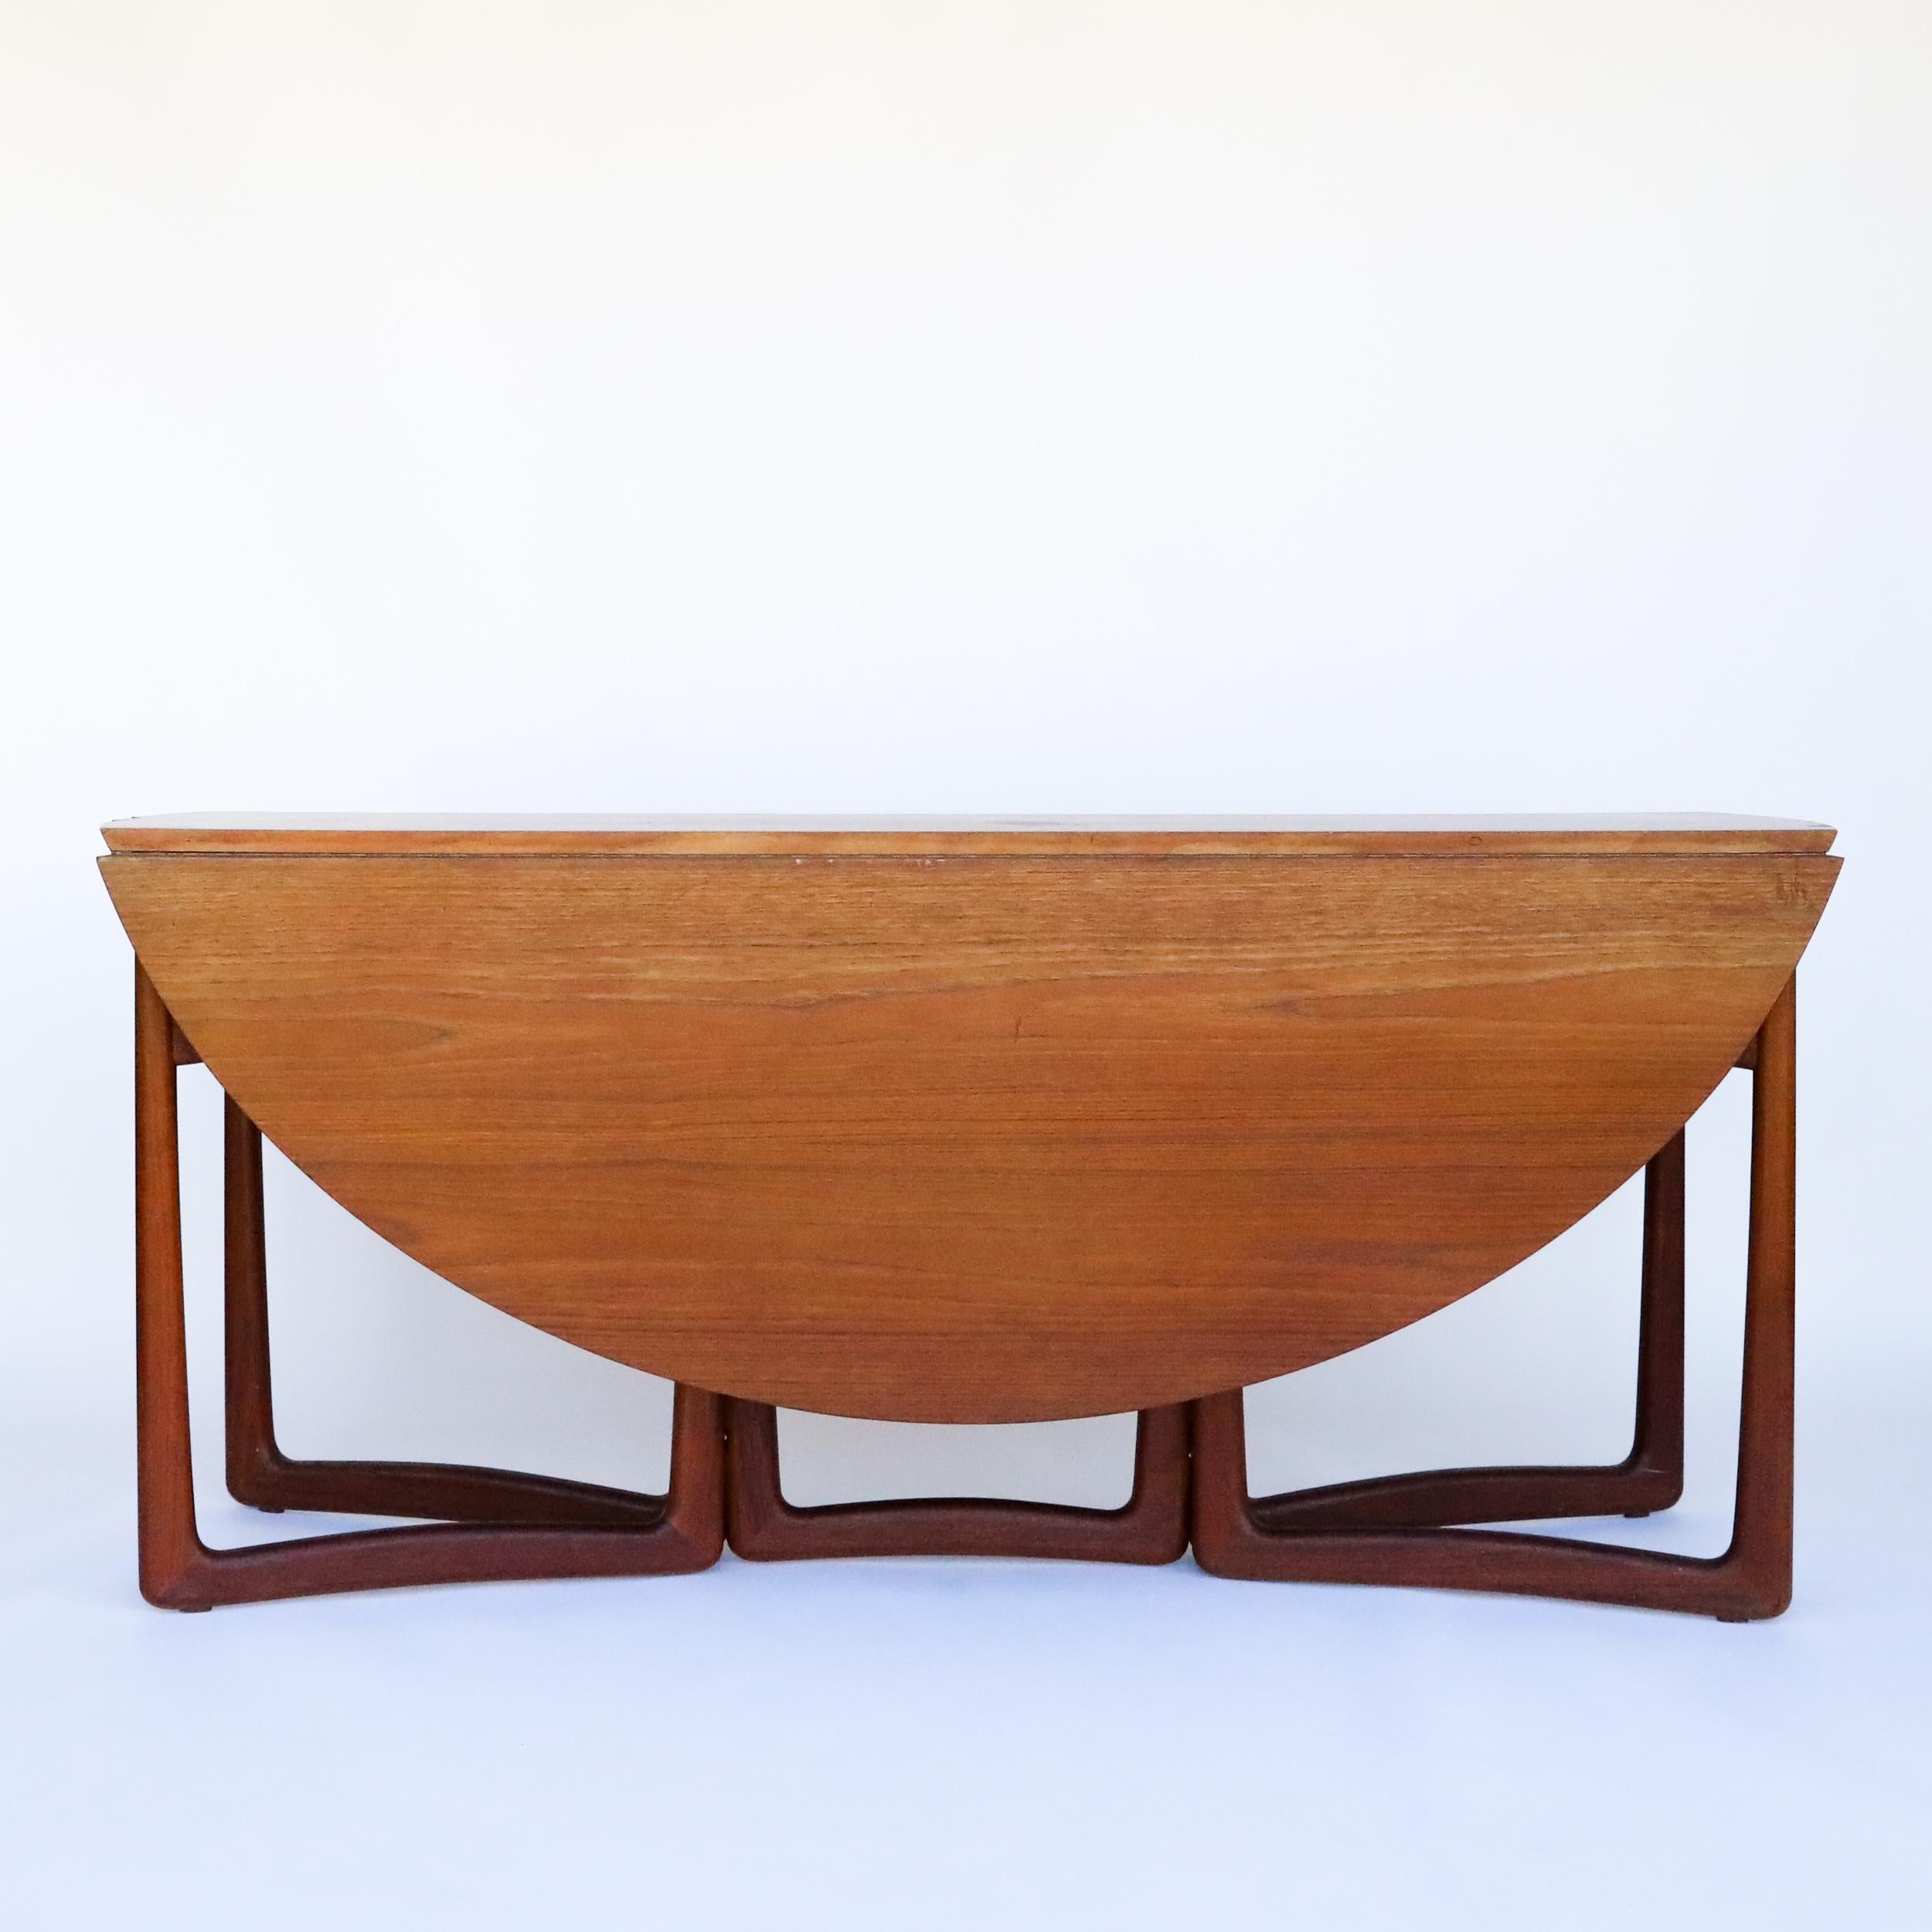 This is a Gateleg drop leaf table by Peter Hvidt and Orla Mølgaard-Nielsen for France & Son in Denmark. This is going to be a stunning conversation piece once we restore it to great condition. Elegant and simple, super high-quality Danish table.